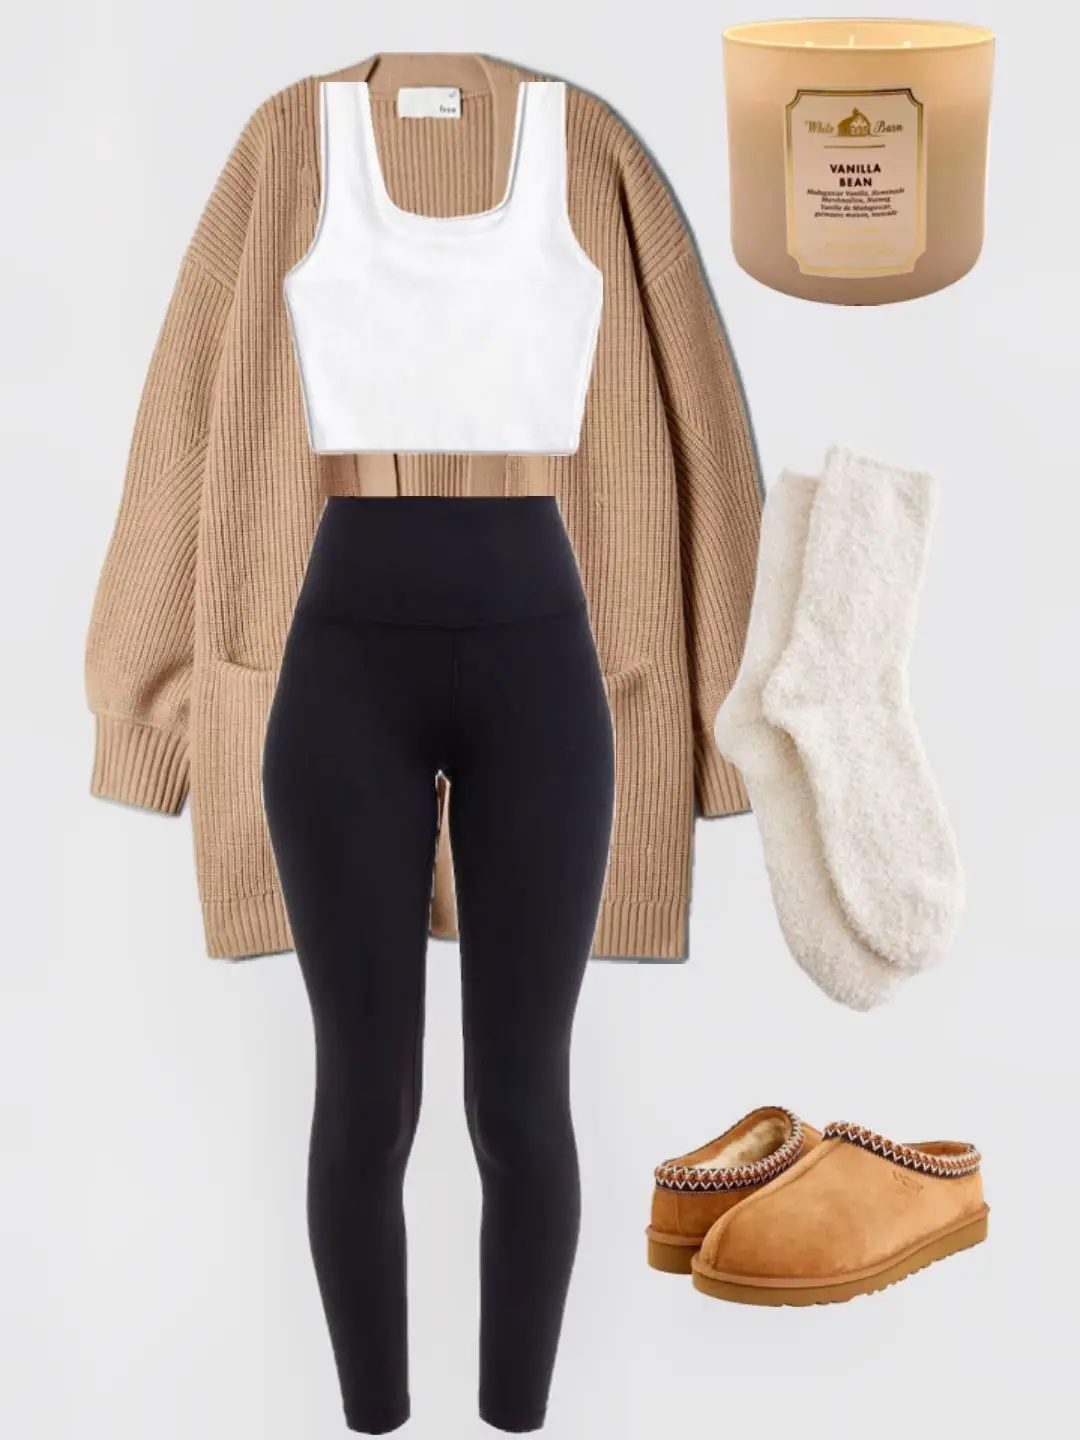 comfy cozy #ootd #falloutfits #falloutfits2022 #grapictee